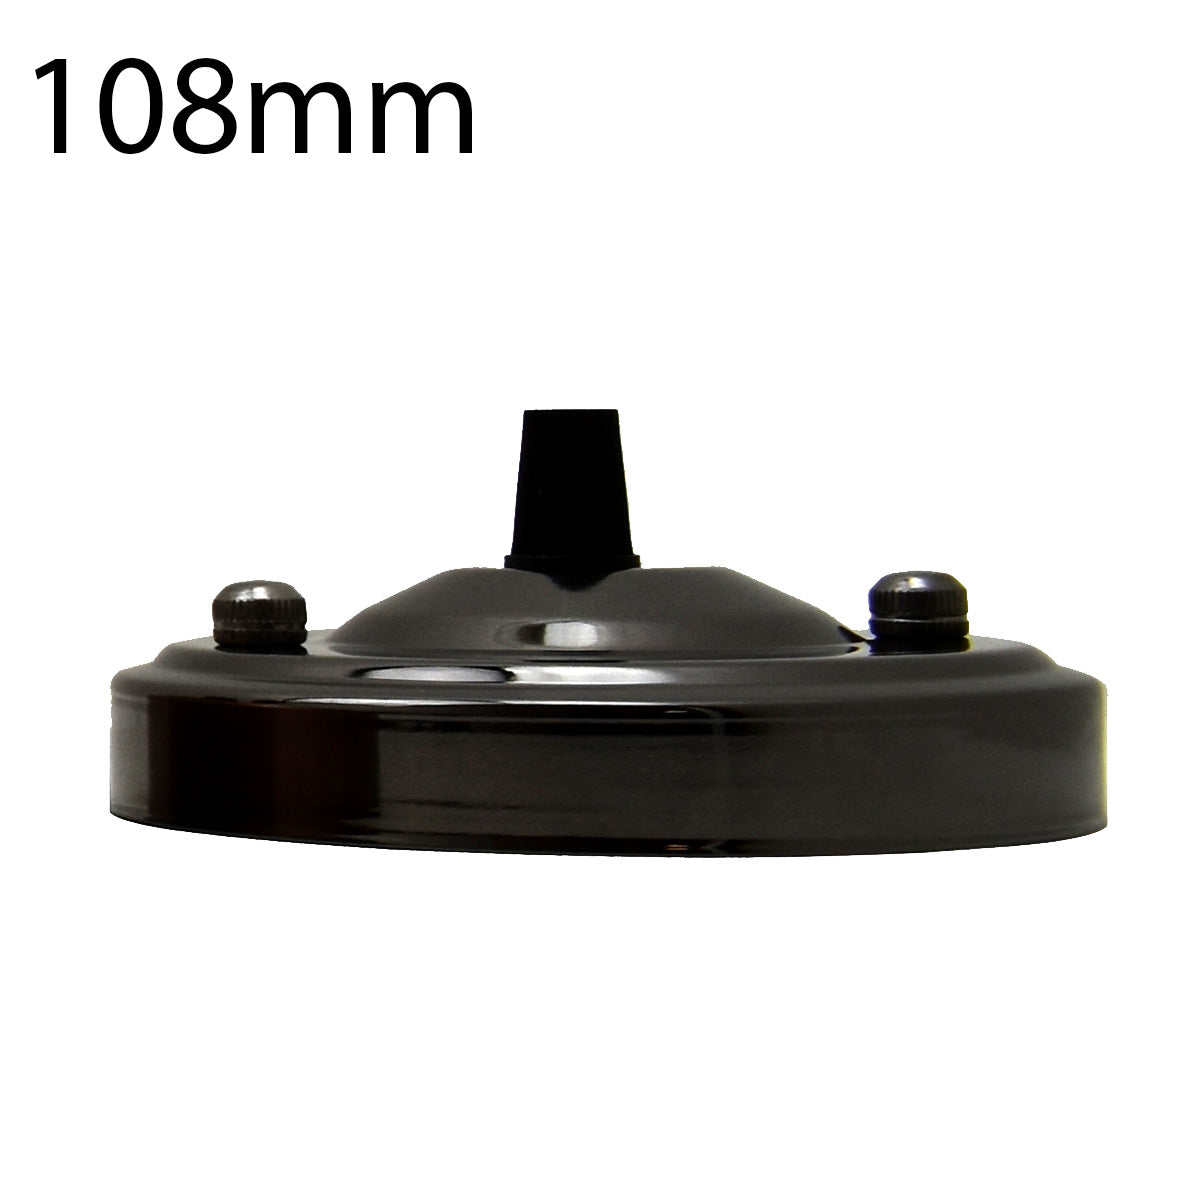 108mm Single Outlet Drop Metal Front Fitting Ceiling Rose